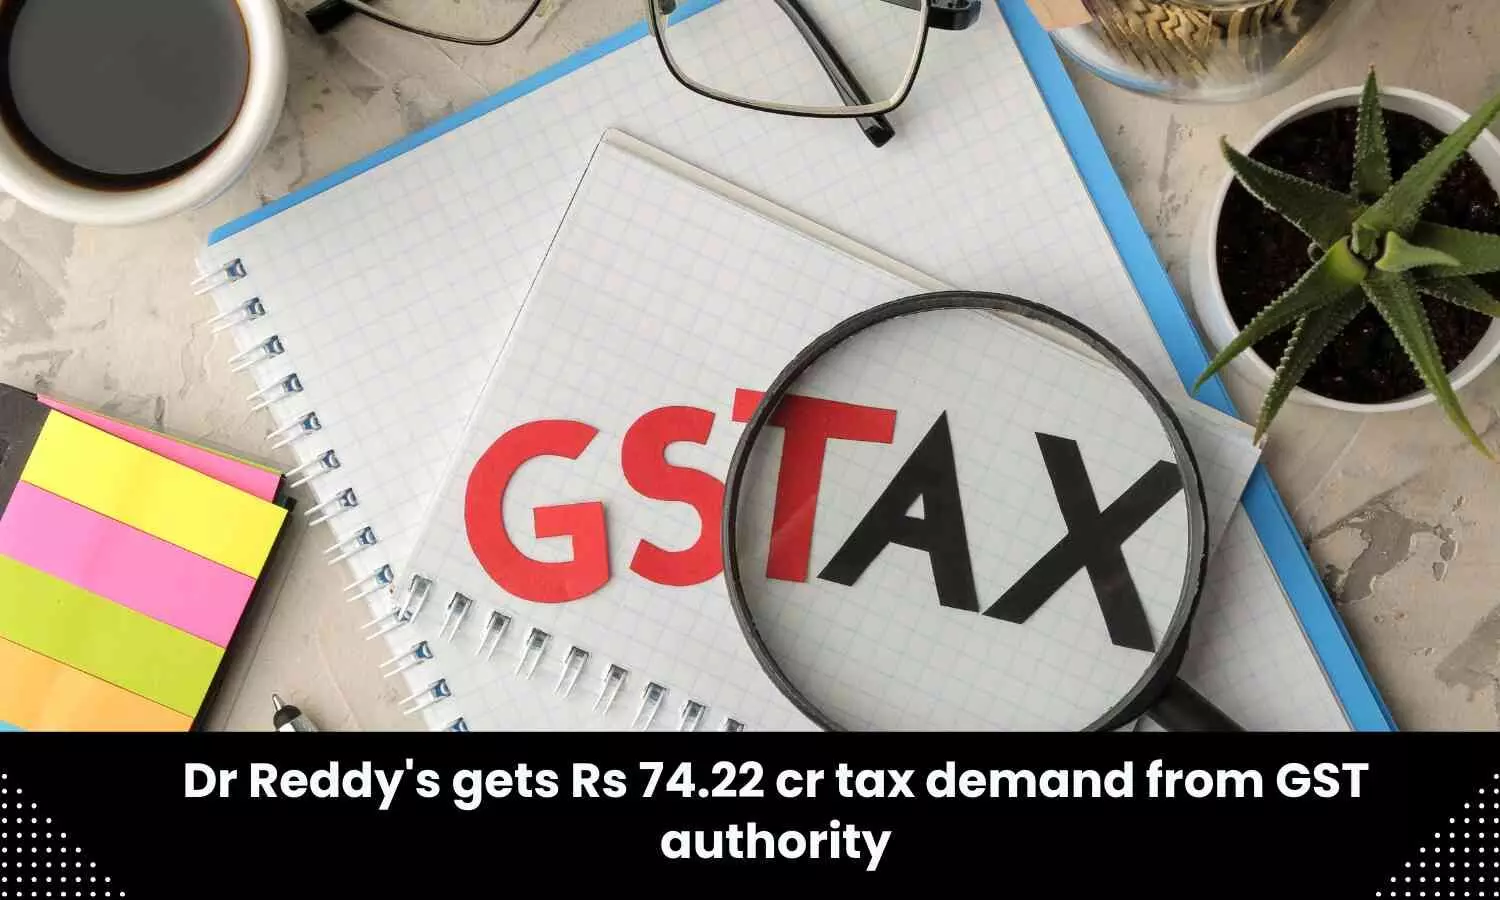 Dr Reddys Labs receives Rs 74.22 crore tax demand from GST authority